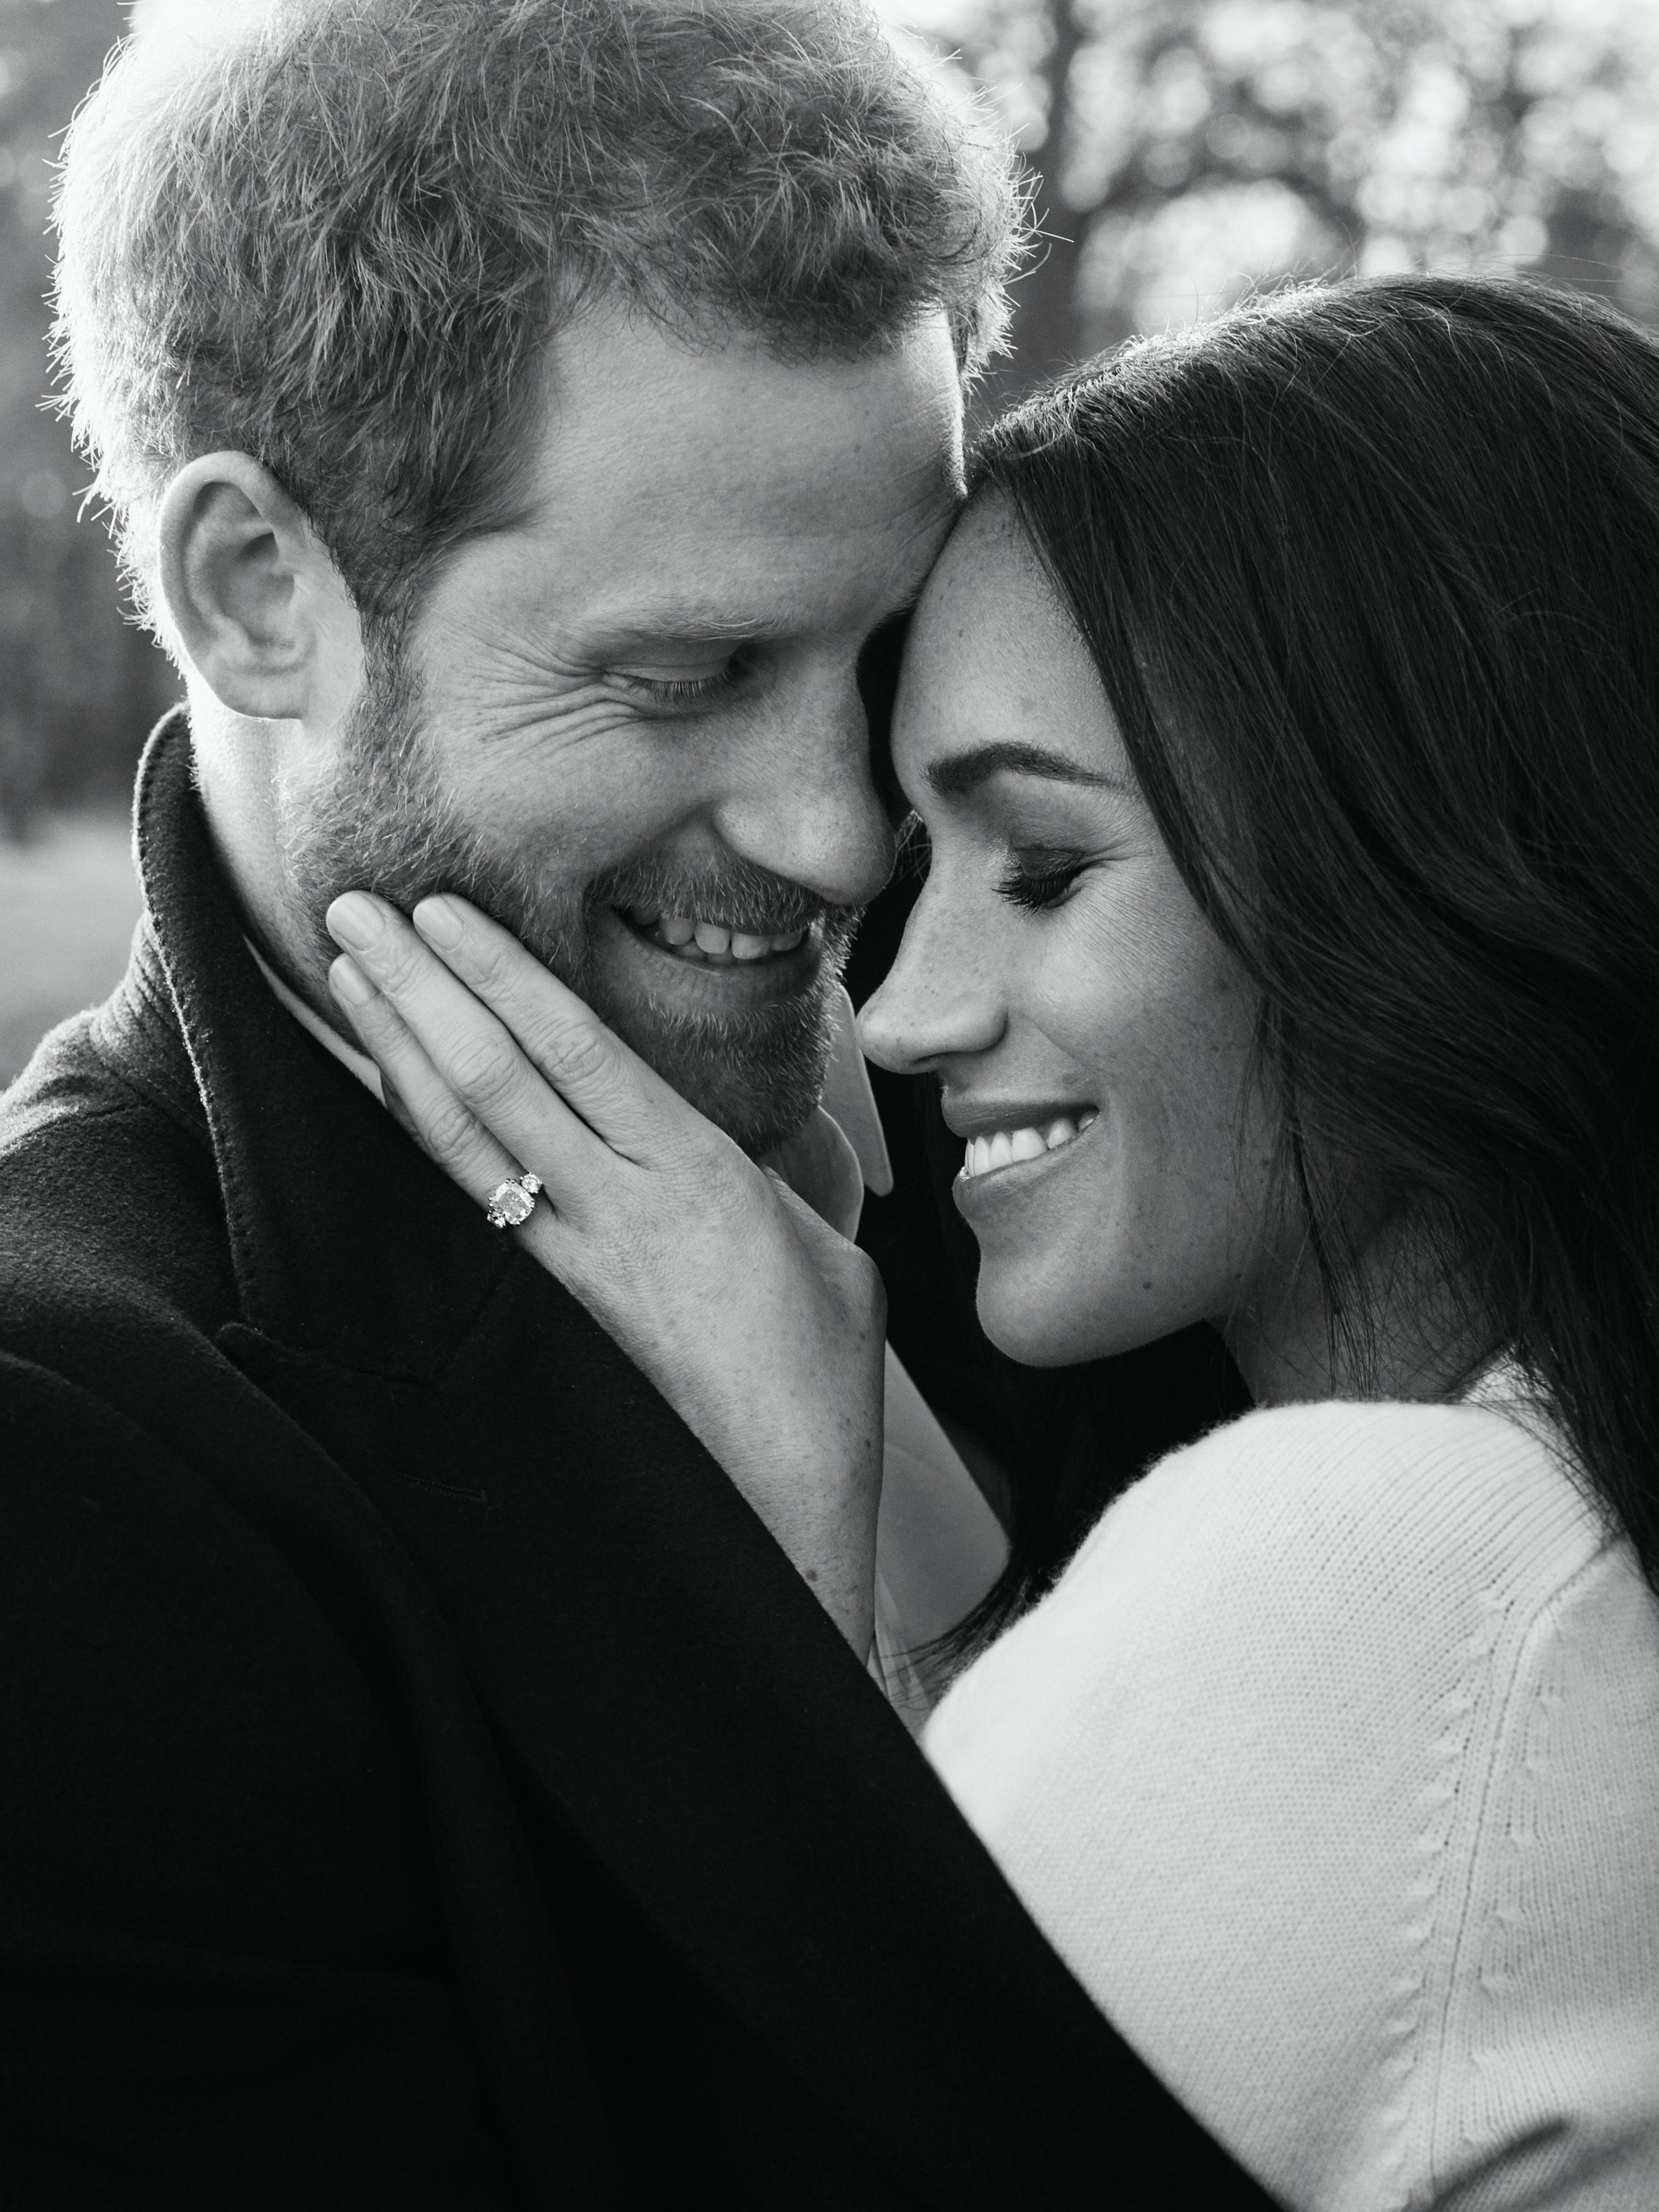 Remodelling your engagement ring isn't rude, just ask Meghan Markle –  styles change, as do financial circumstances, so it's OK to refresh your  treasured piece with a new look or bigger diamond |